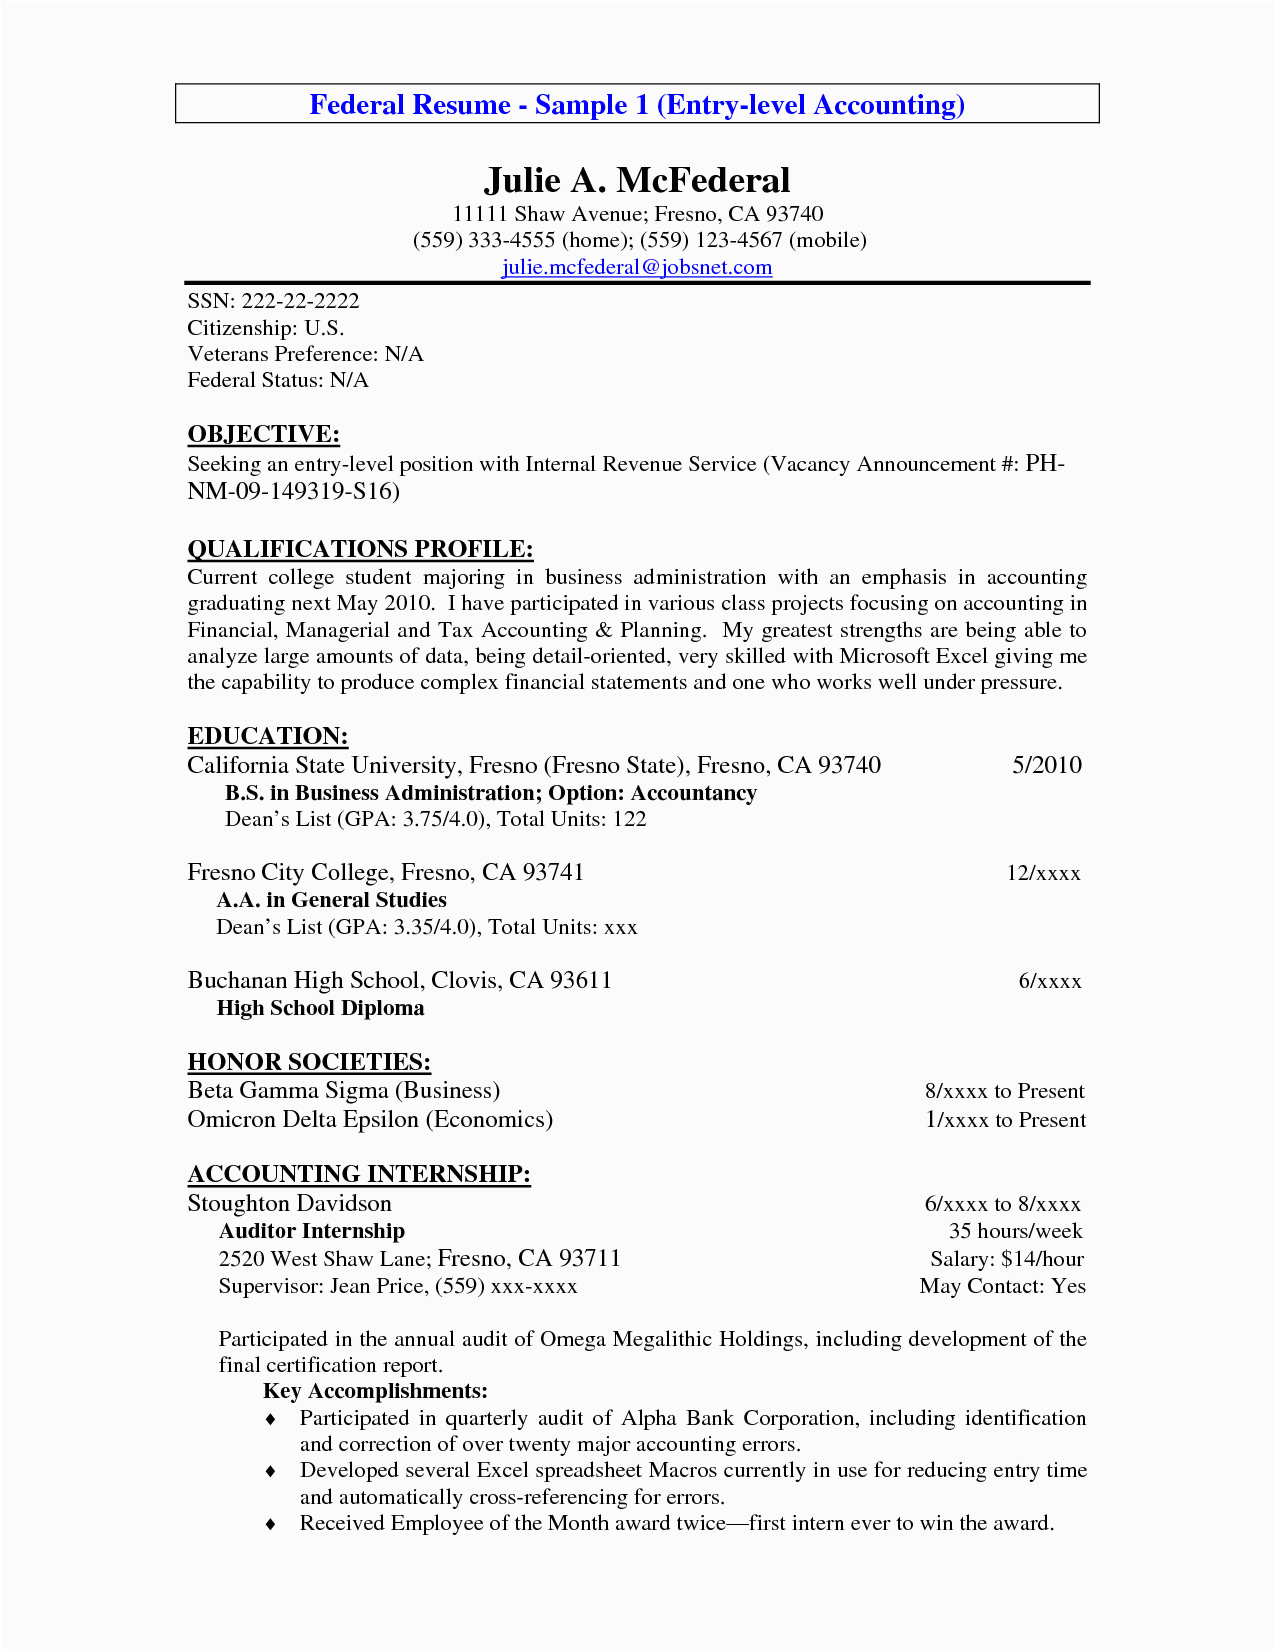 Sample Resume Objective Statements for Accounting Accounting Resume Objective